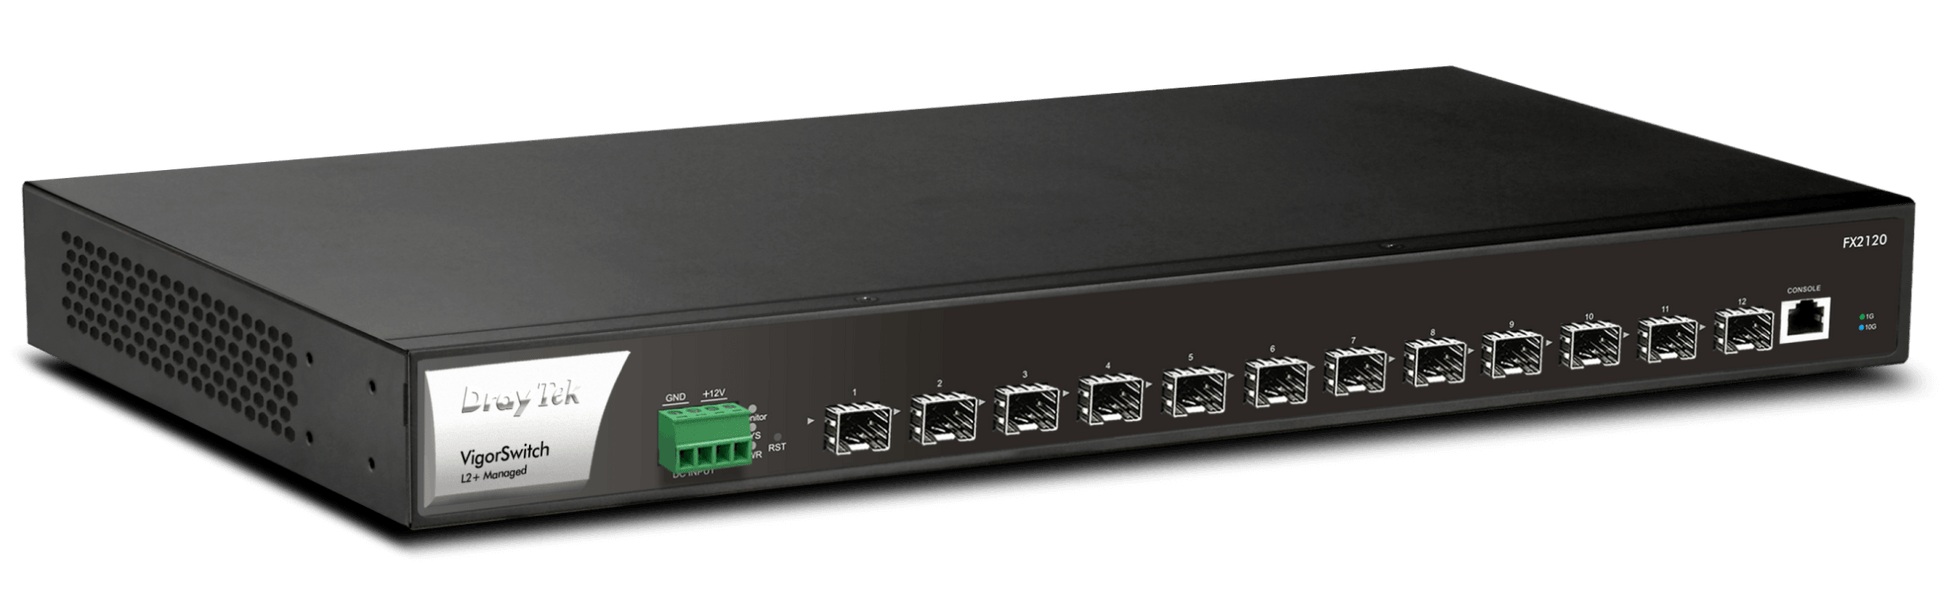 DrayTek VigorSwitch FX2120 Full Fibre 10G Layer 2+ Managed Switch Front View 240GBps Switching Capacity Left View